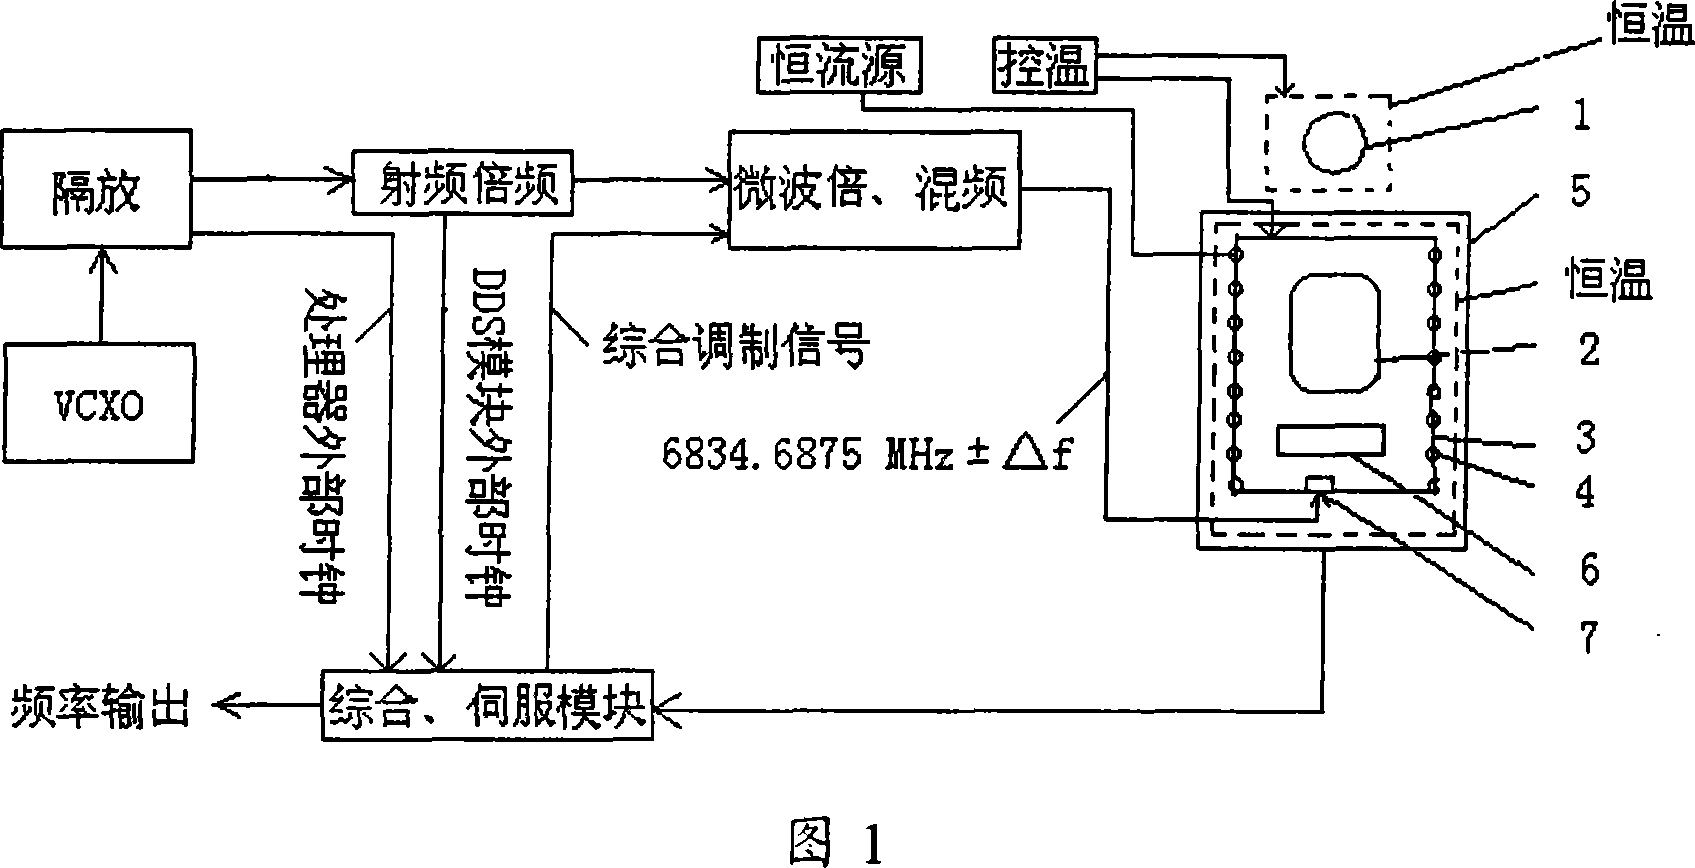 Improved passive Rb atomic frequency standard servo control method and servo control circuit